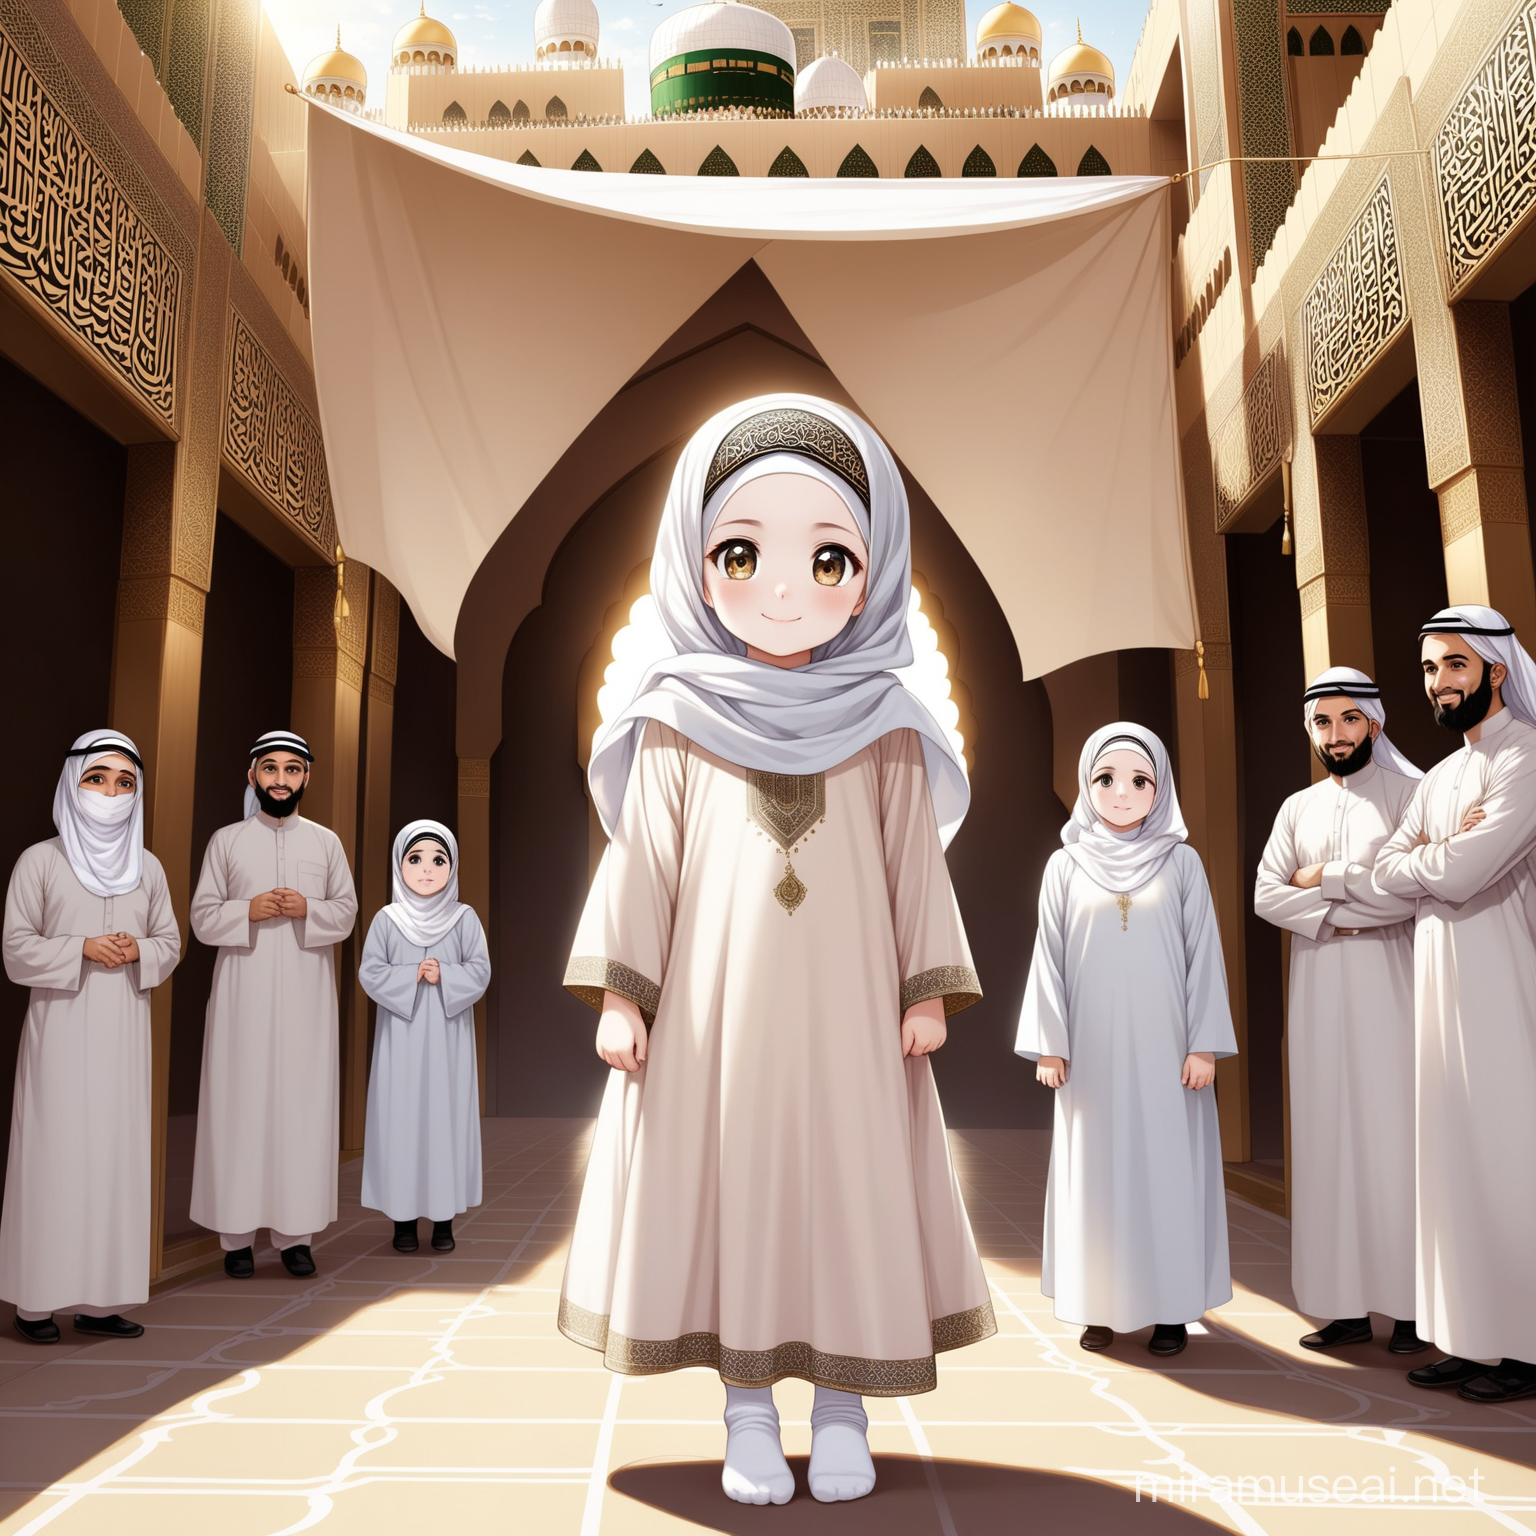 Character Persian little girl(full height, Big white flag in one hand proudly, Muslim, with emphasis no hair out of veil(Hijab), smaller eyes, bigger nose, white skin, cute, smiling, wearing socks, clothes full of Persian designs) with Parents.

Atmosphere Kaaba in Mecca, yard.